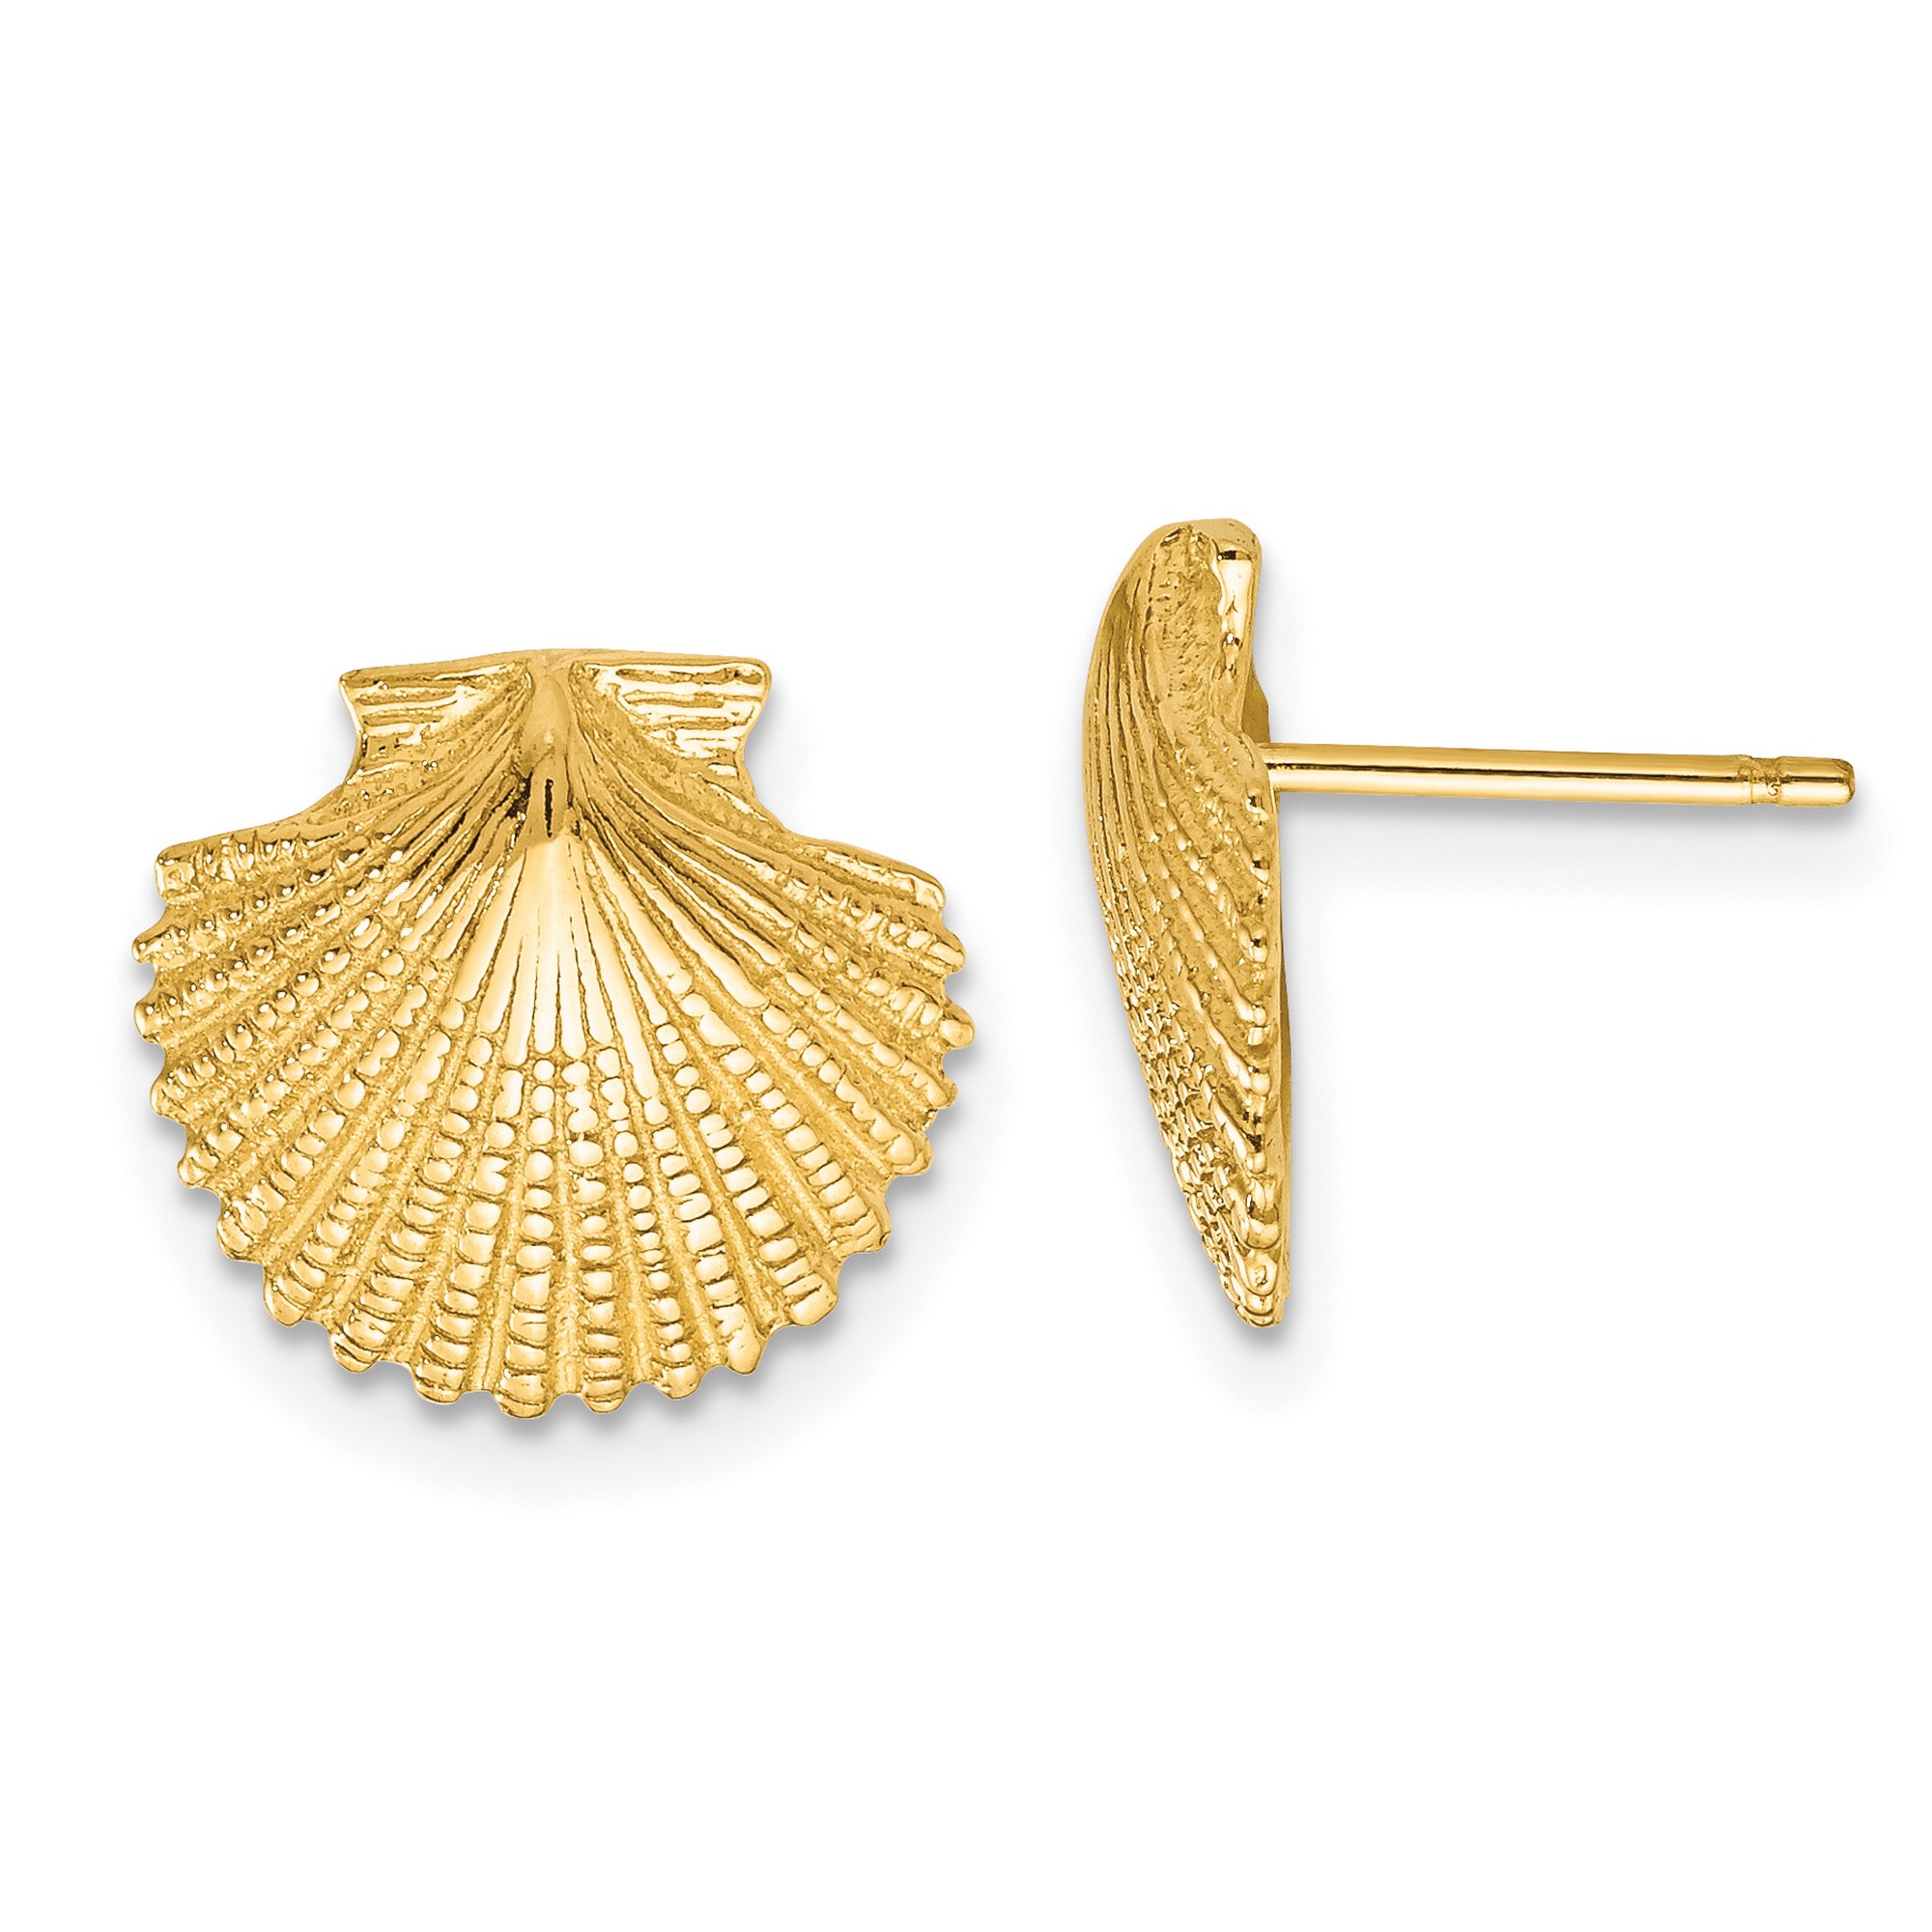 Pre-owned Jewelry Stores Network 14k Yellow Gold Scallop Shell Post Earrings 13x13 Mm